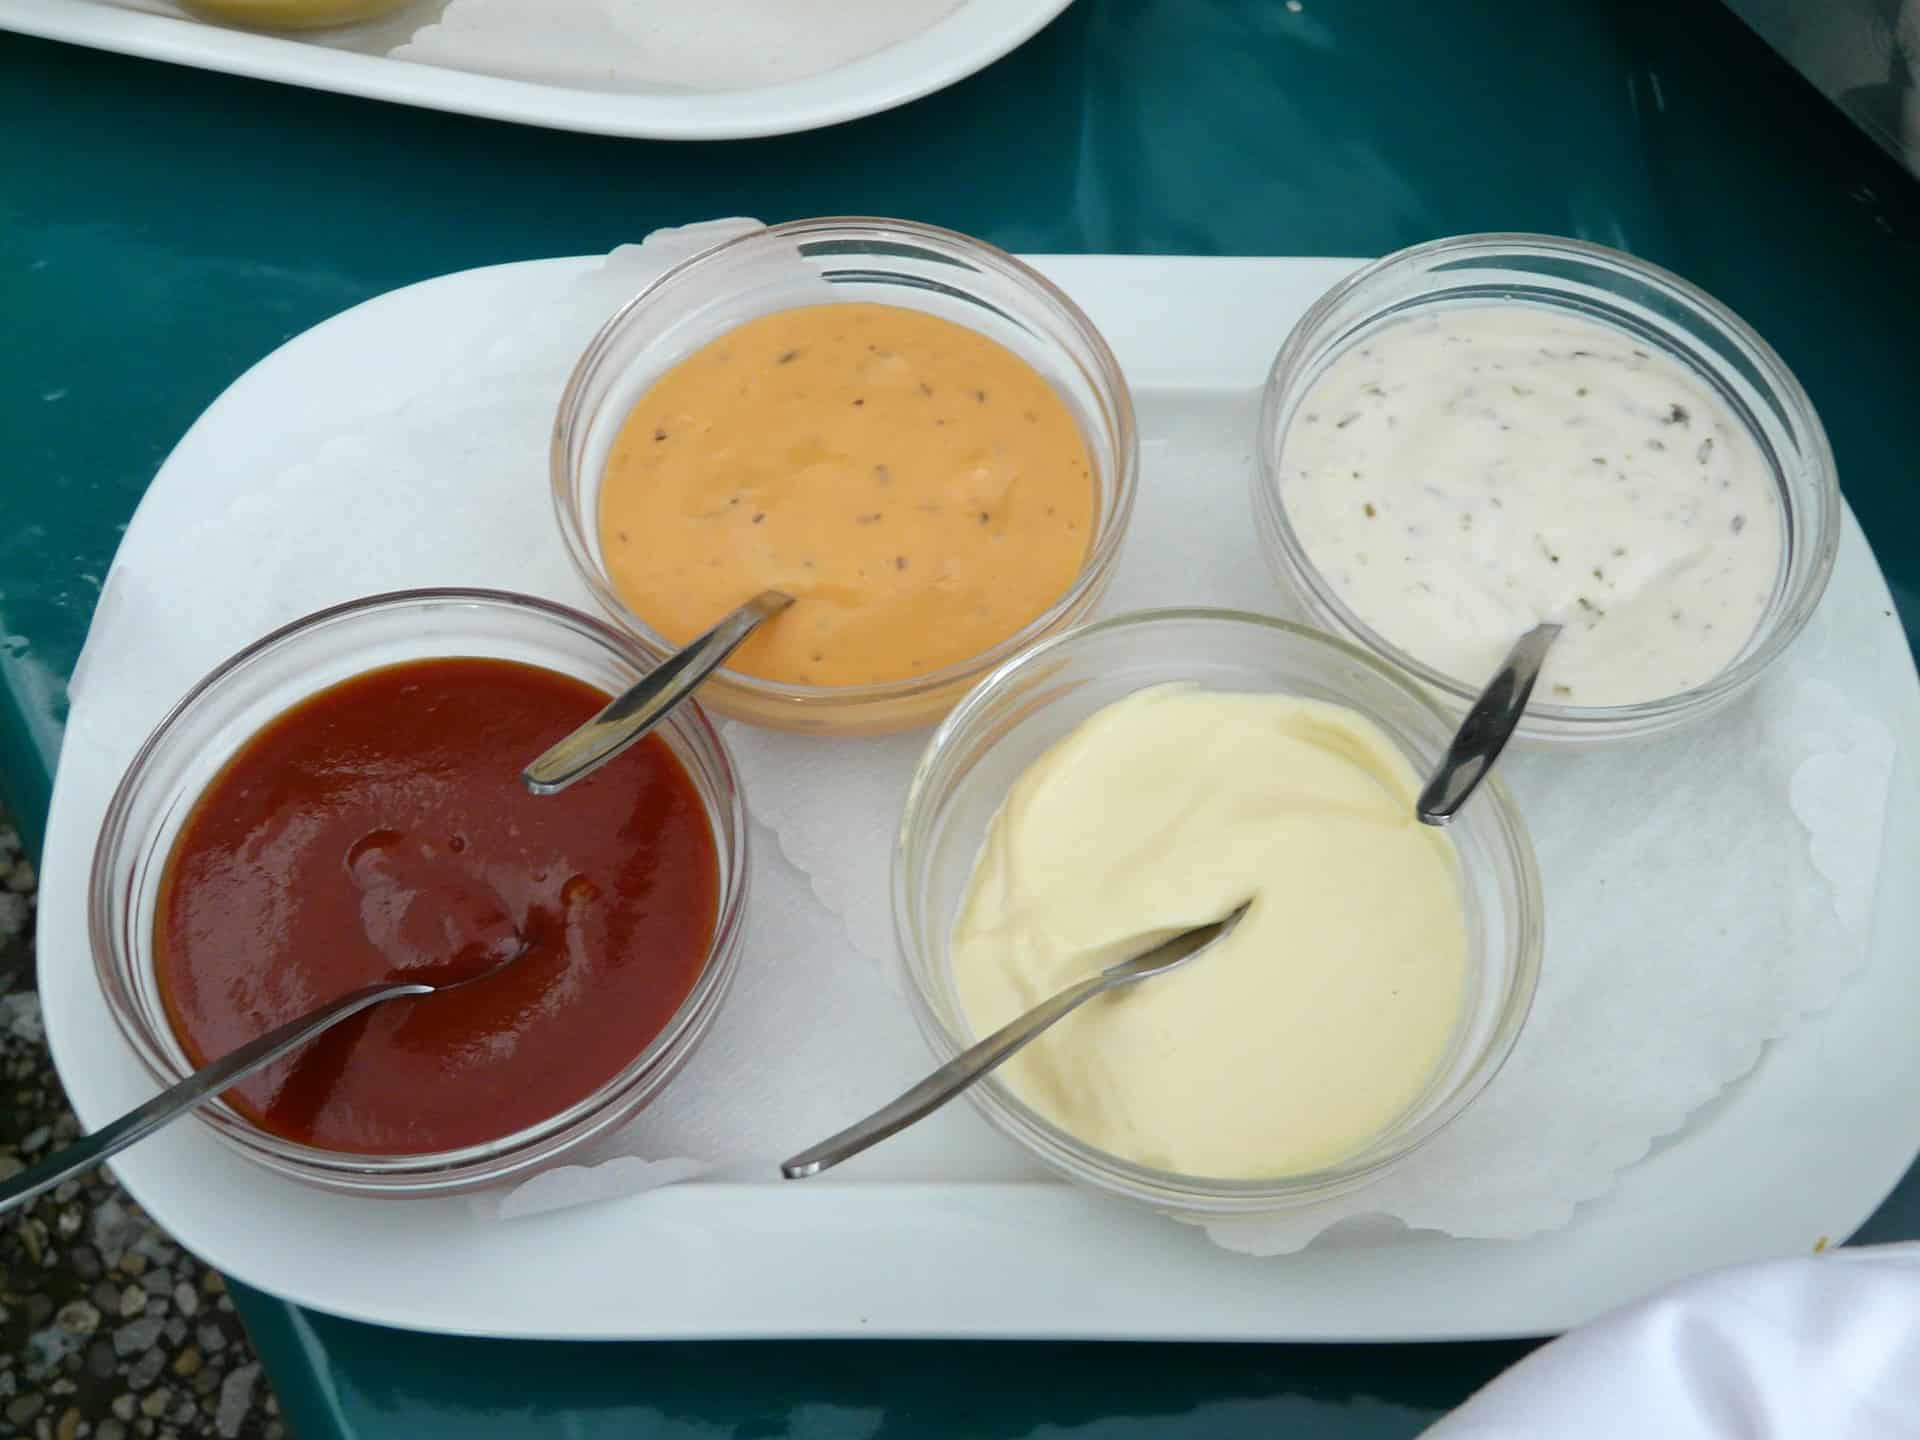 4 bowls with condiments and spoon in each